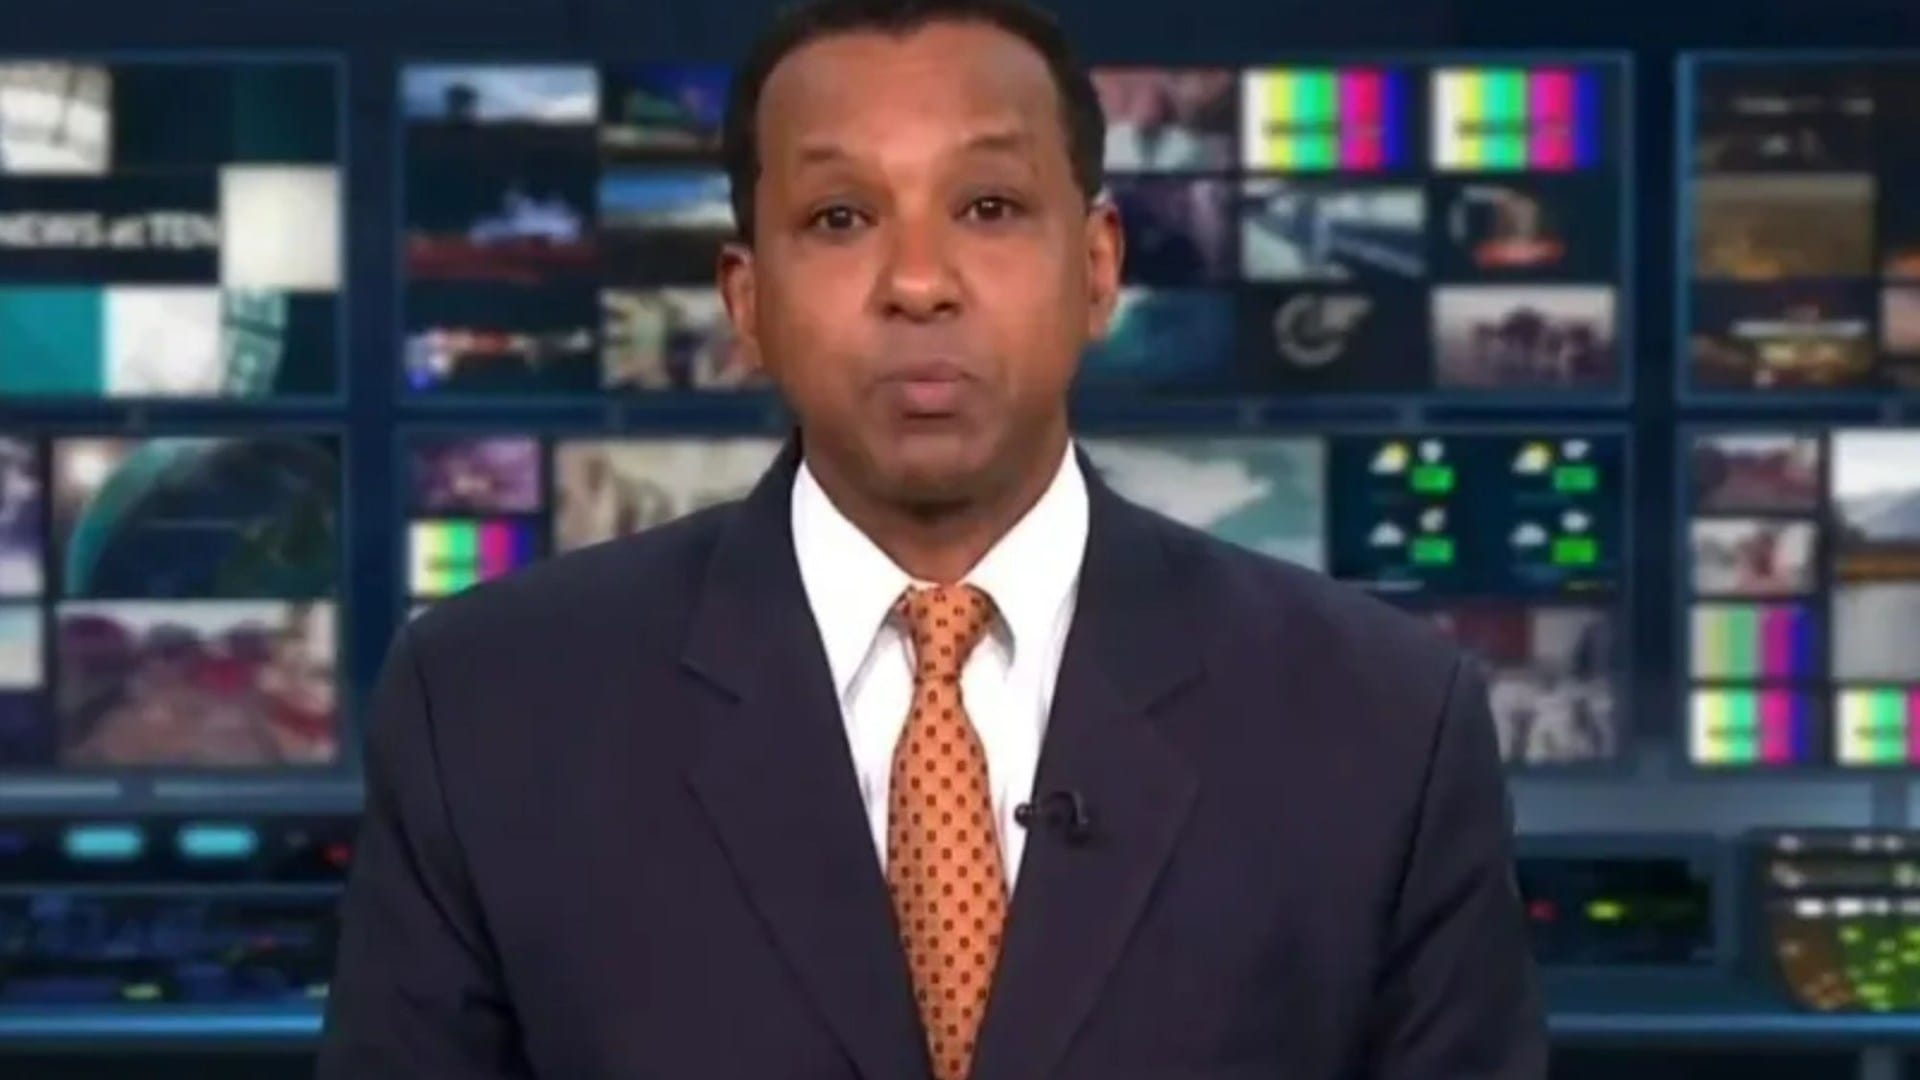 ITV axes News repeat after viewers' health concerns over 'struggling' presenter